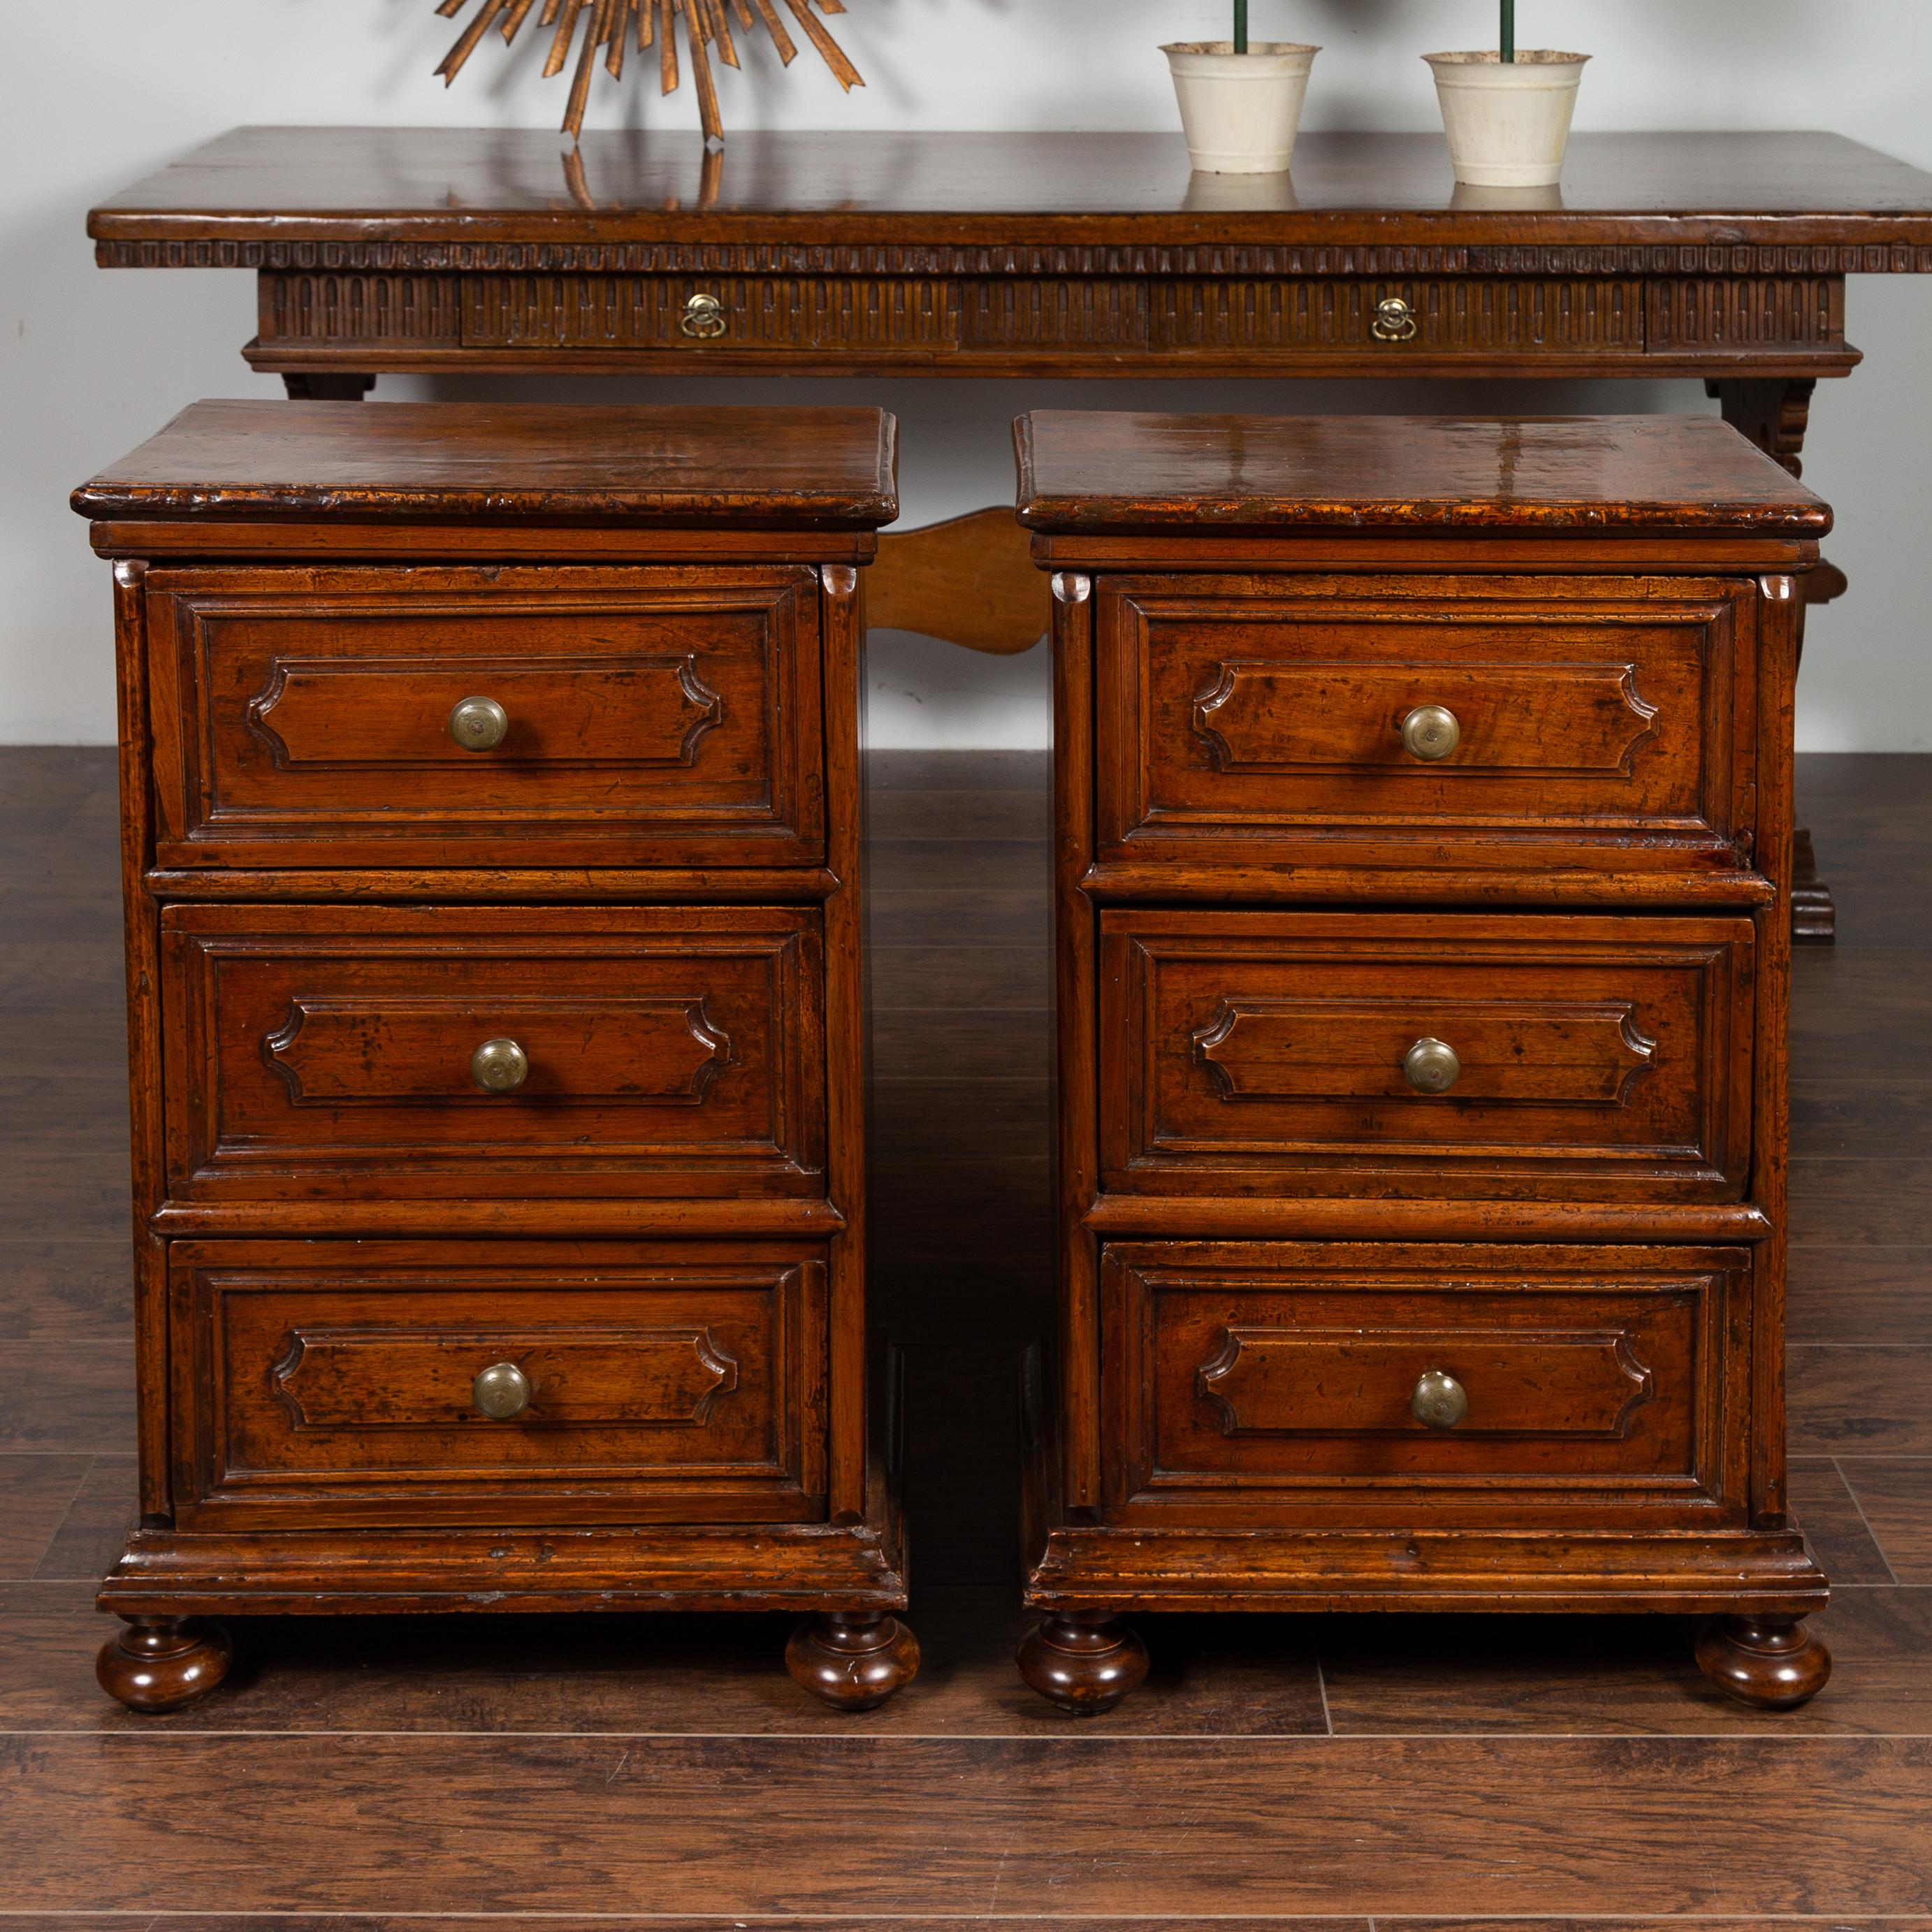 A pair of Italian walnut commodini from the mid-19th century, with three drawers and bun feet. Born in Italy during the third quarter of the 19th century, each of these petite commodes features a rectangular top sitting above three drawers adorned